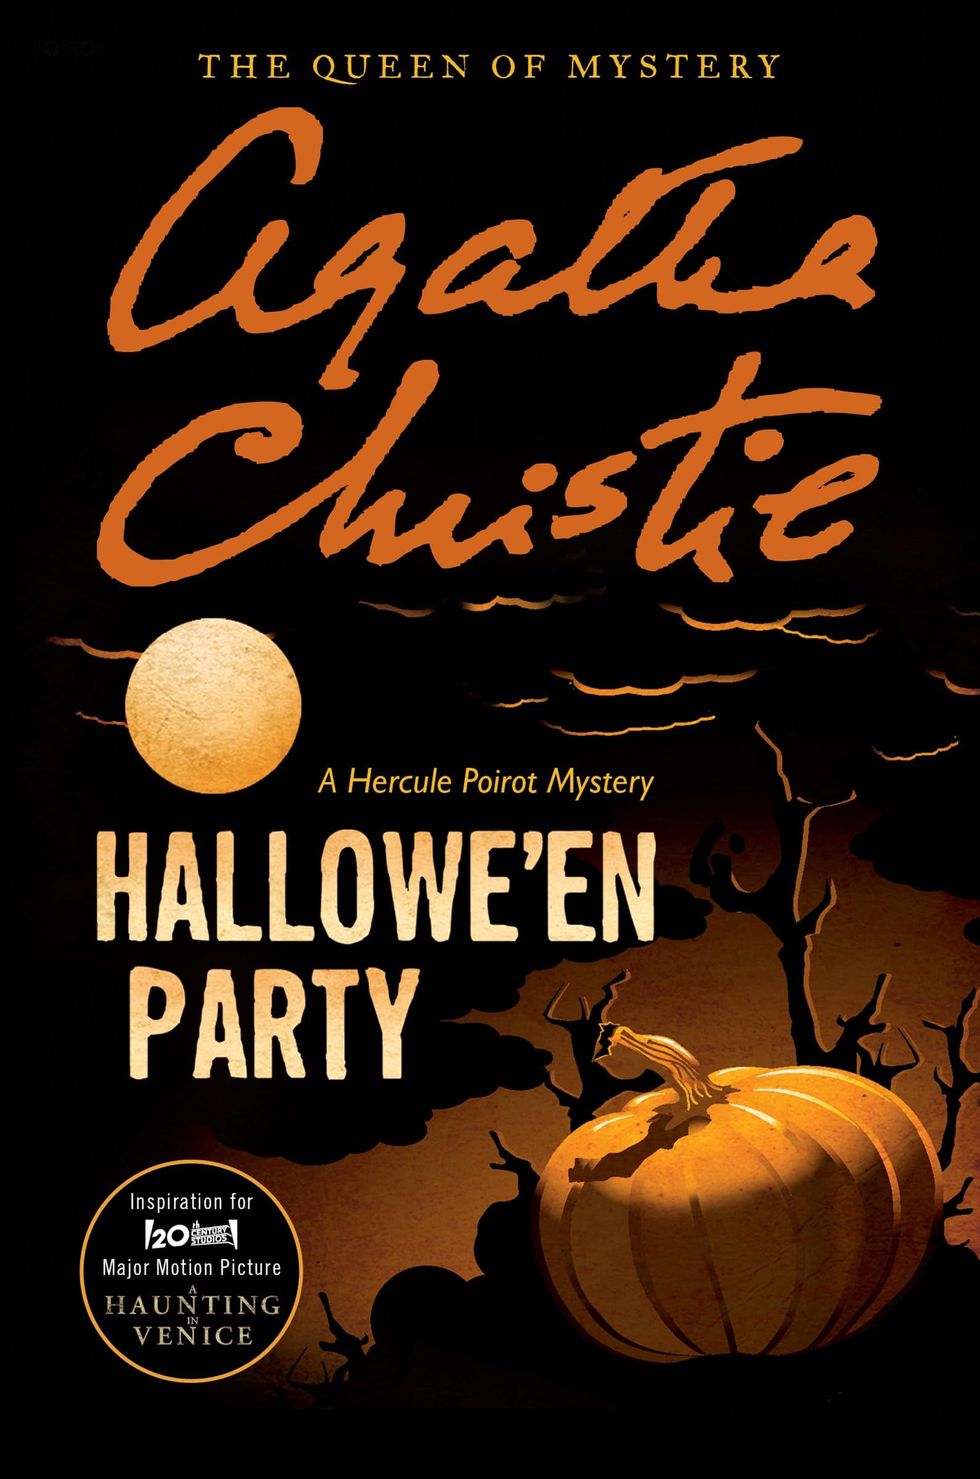 Hallowe'en Party: Inspiration for the 20th Century Studios Major Motion Picture A Haunting in Venice (Hercule Poirot Mysteries, 36)